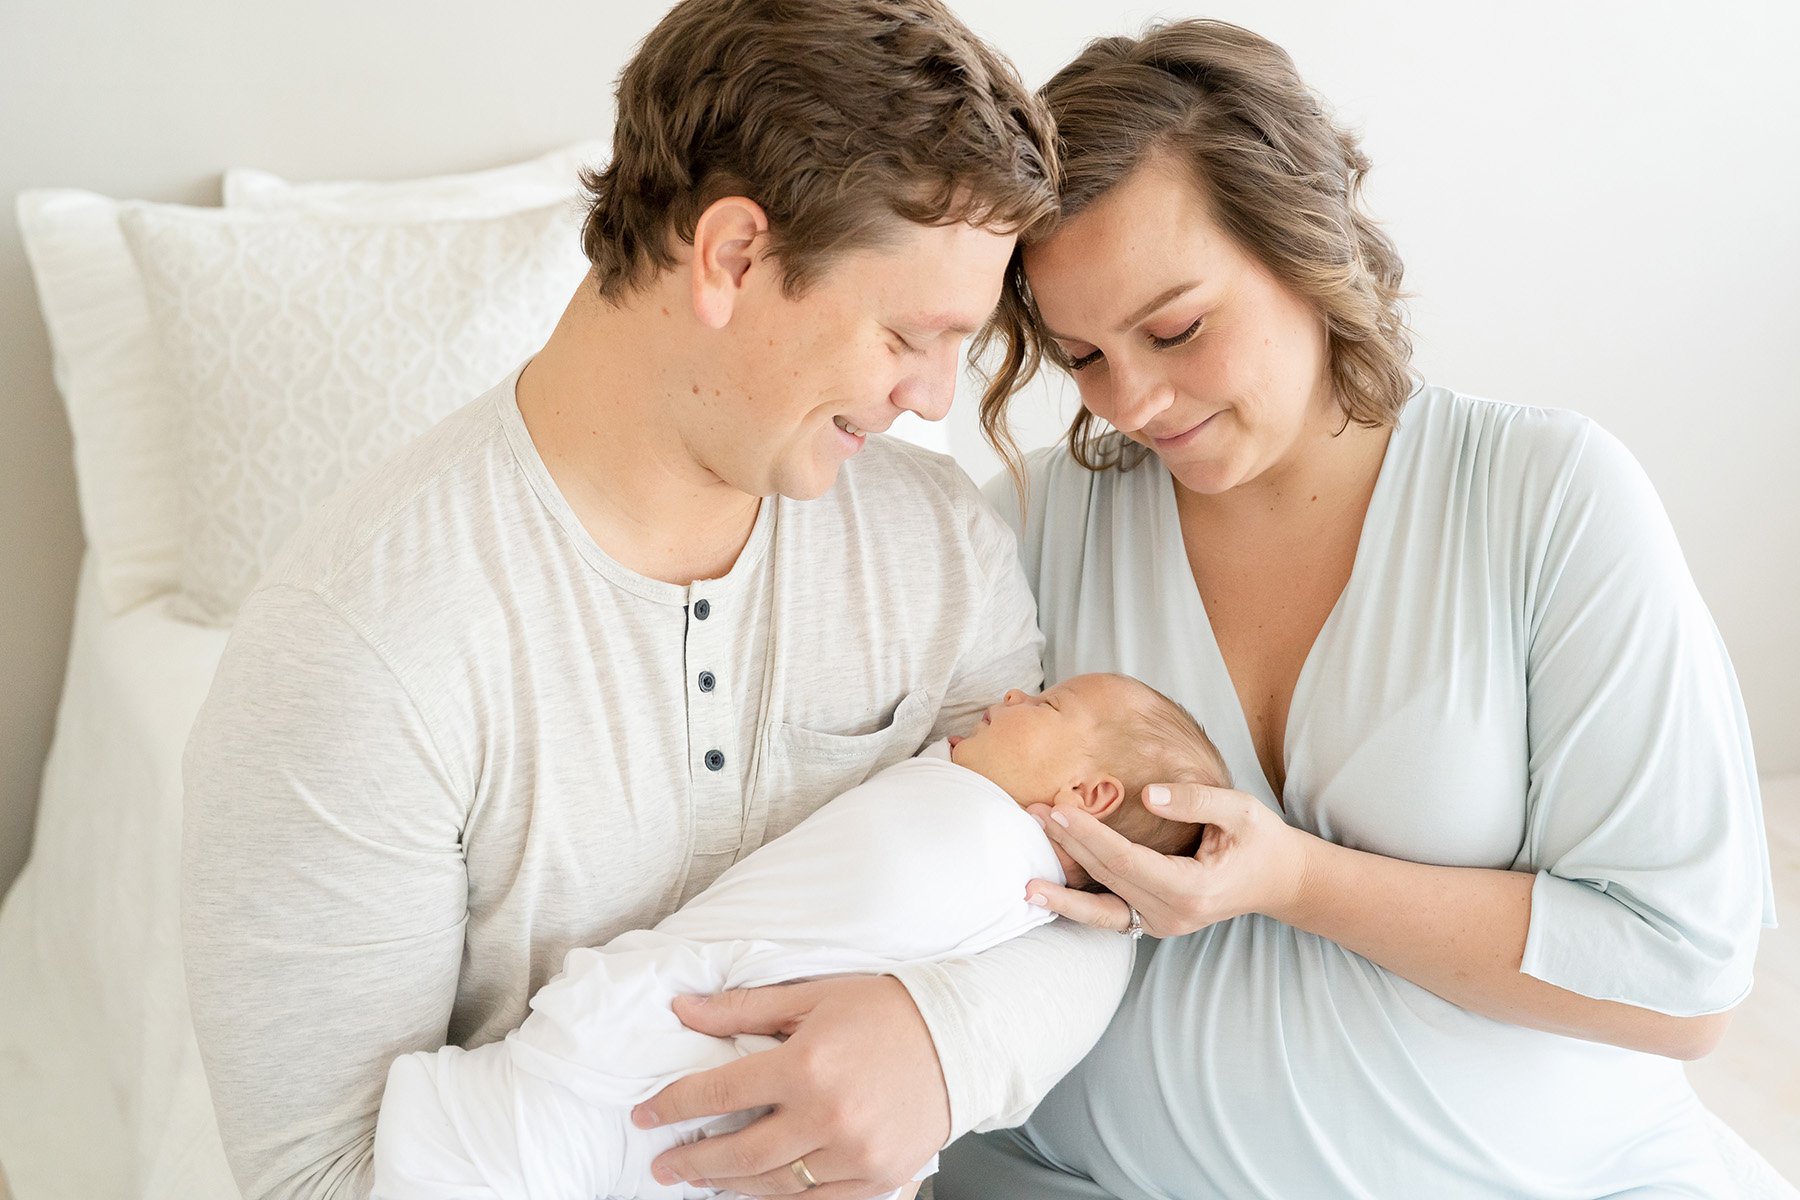 Dad and mom hold sleeping newborn baby. Mom is wearing clothing from Julie Brock Photography for the newborn session.